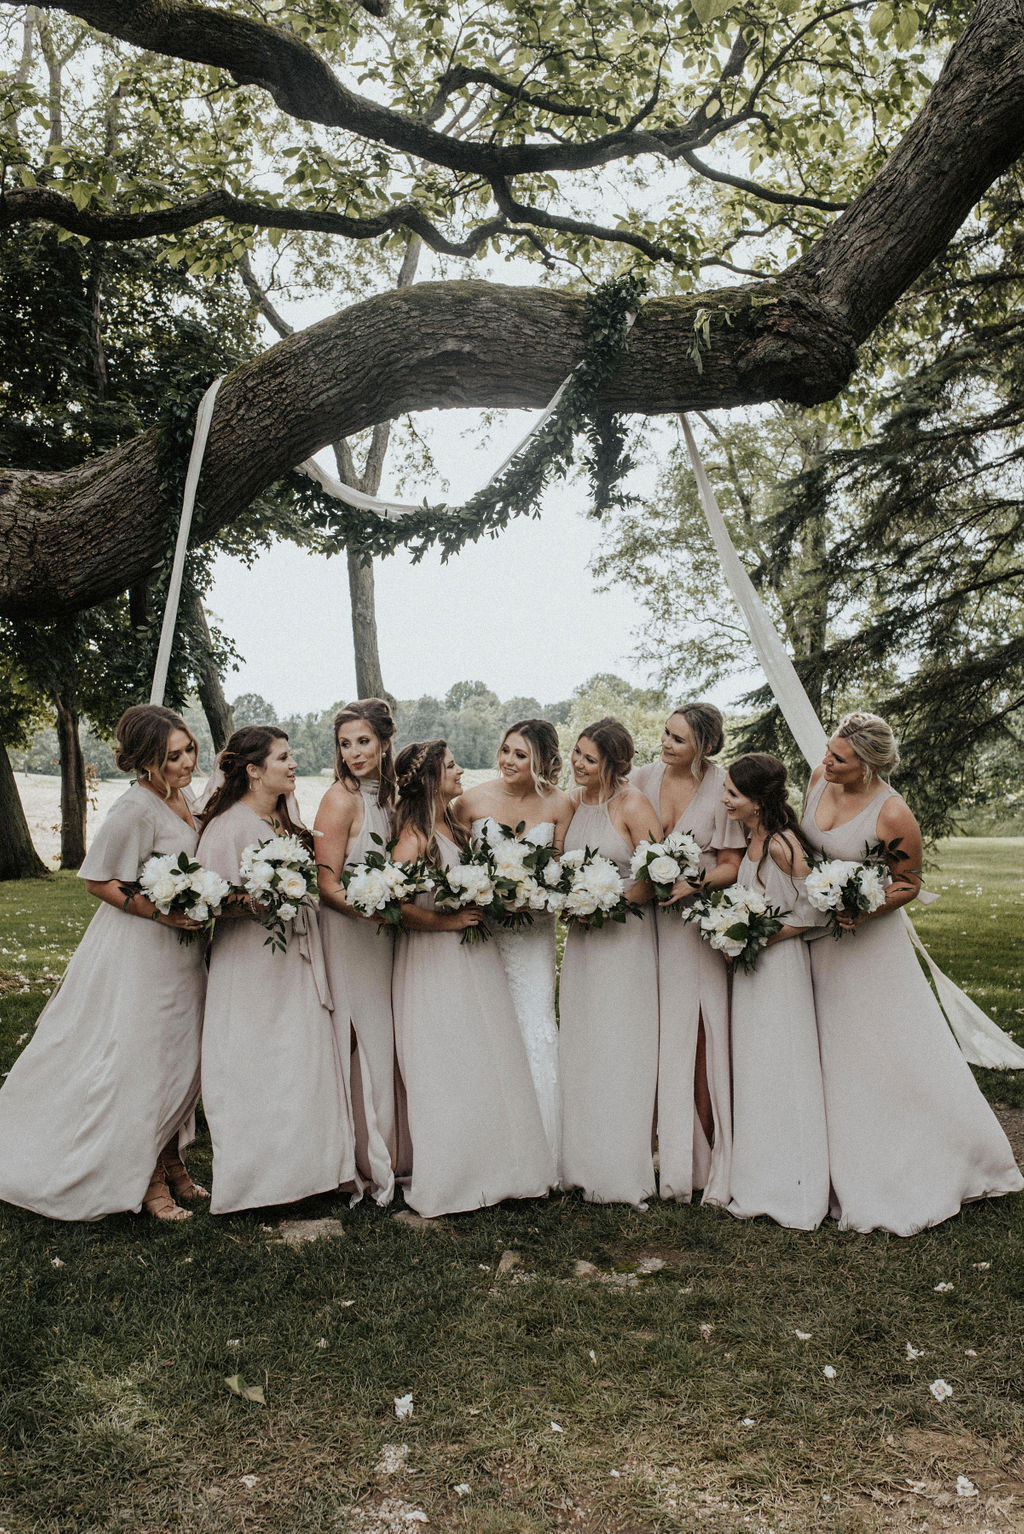 A bride and her bridesmaids smiling